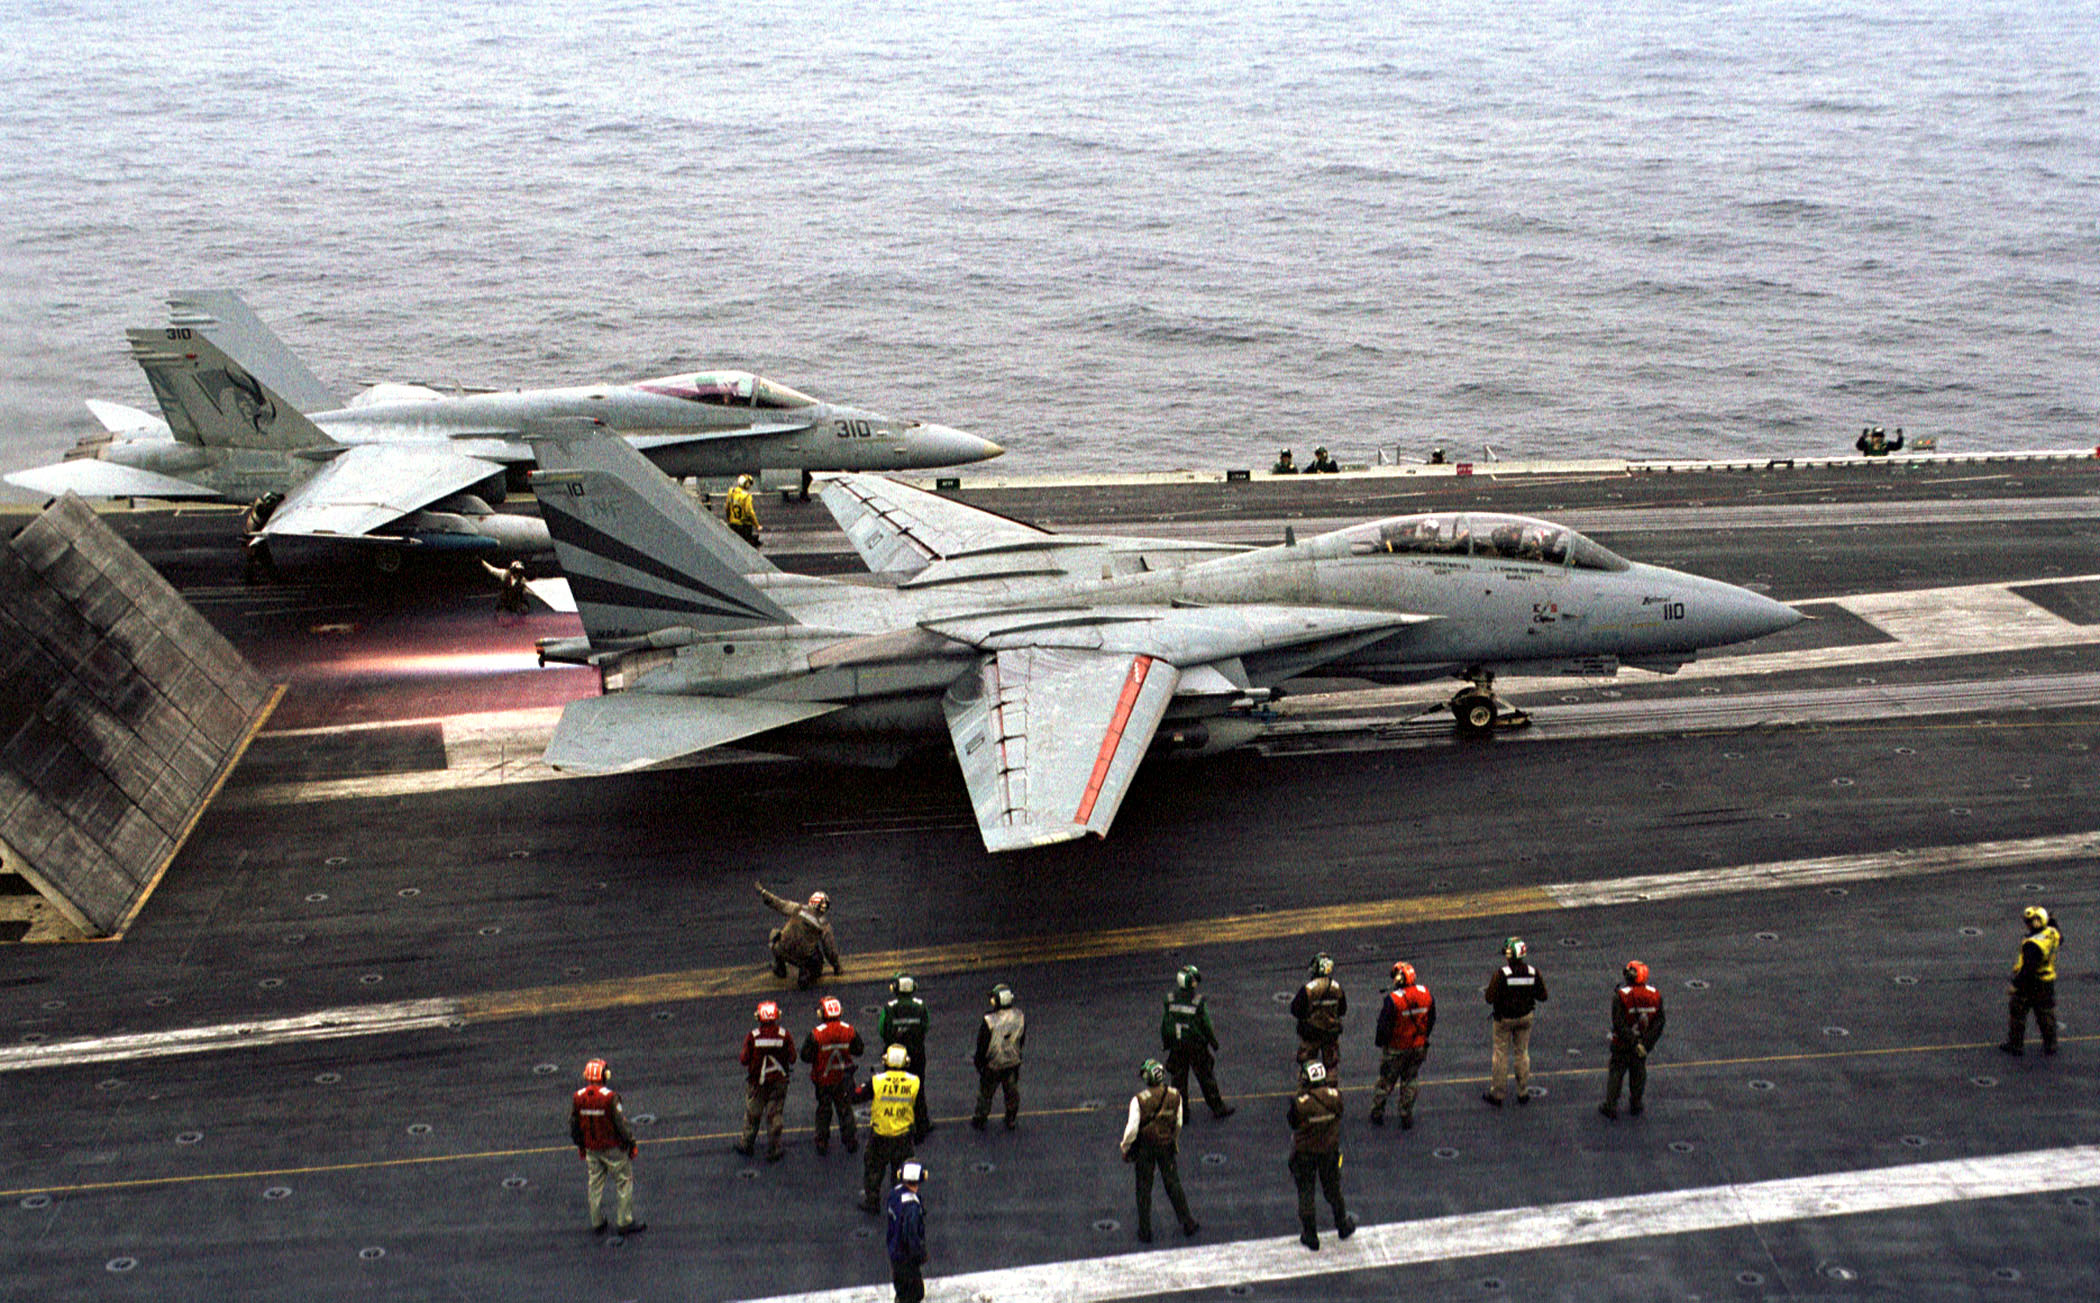 An F-14 Tomcat Fighter pumps up the afterburners, preparing to launch from the waist of the USS Kitty Hawk.